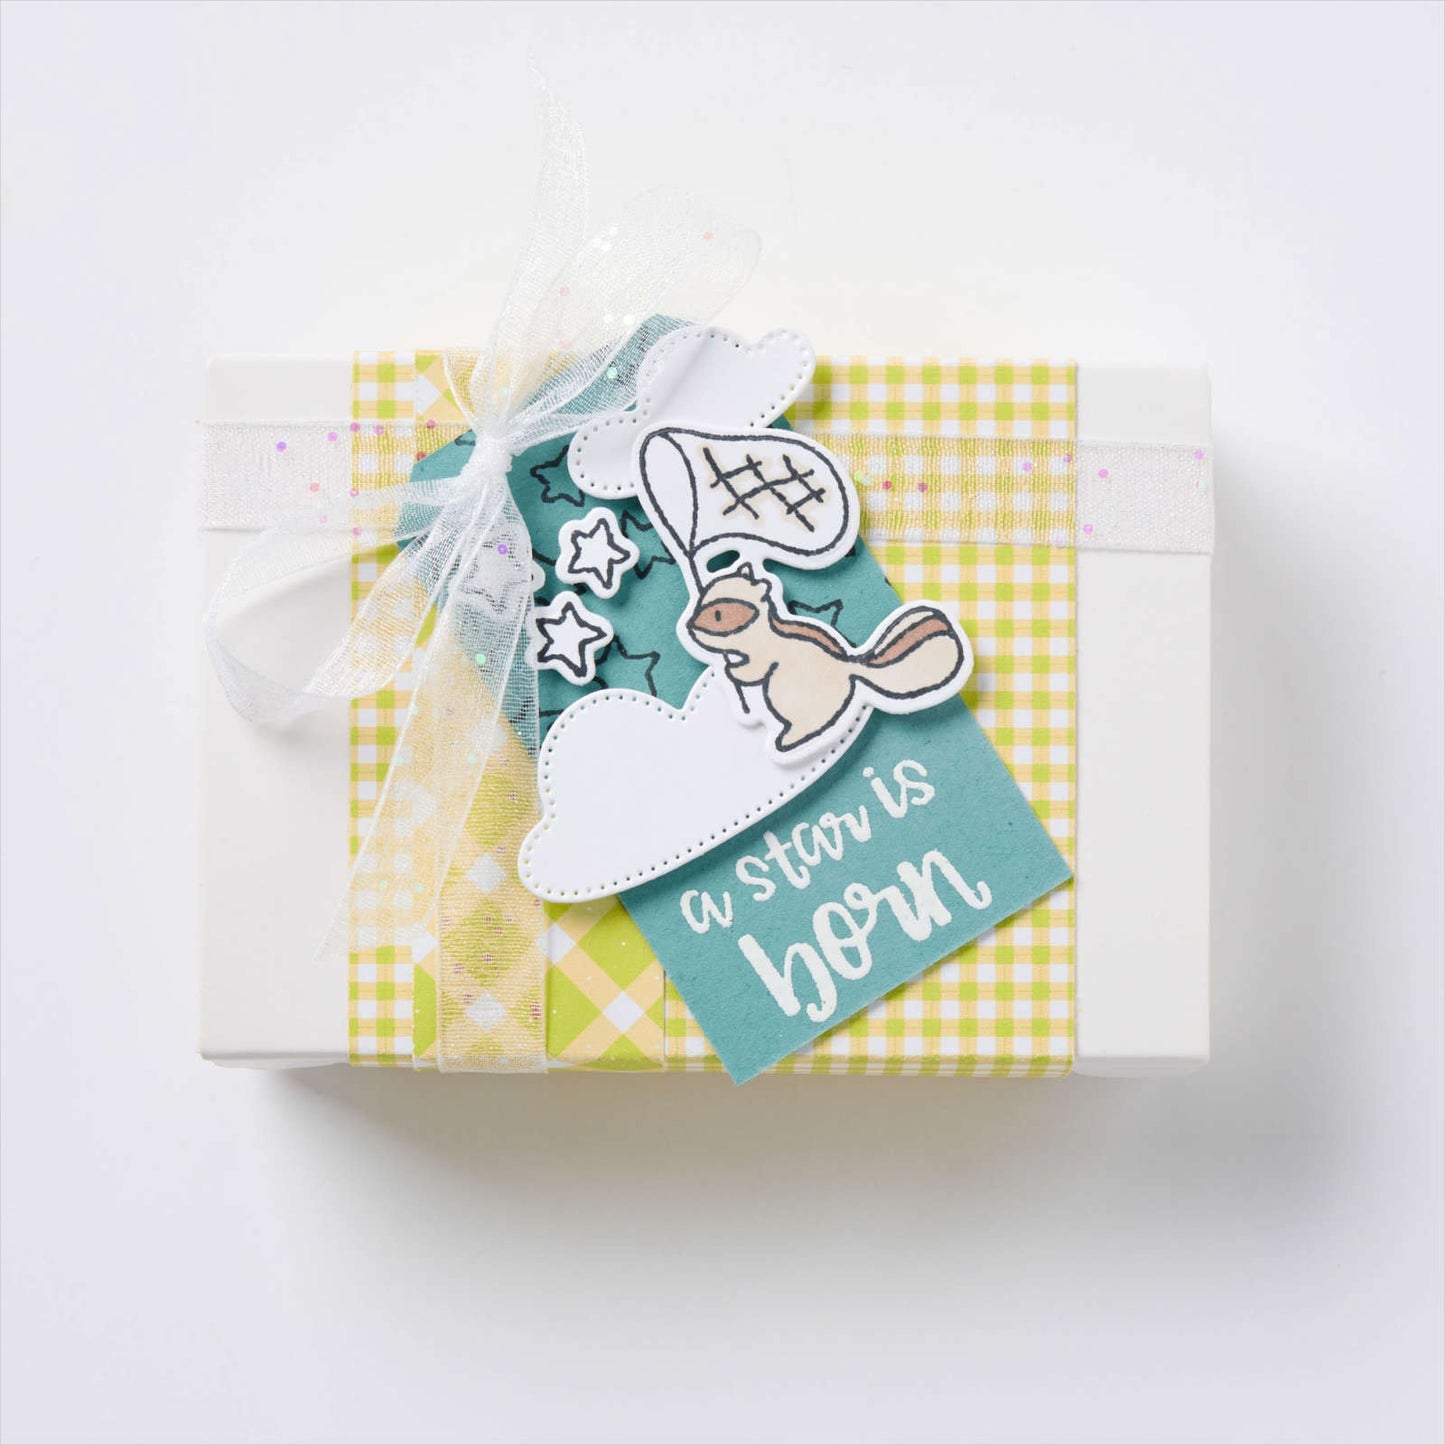 Stampin' Up! Glorious Gingham DSP